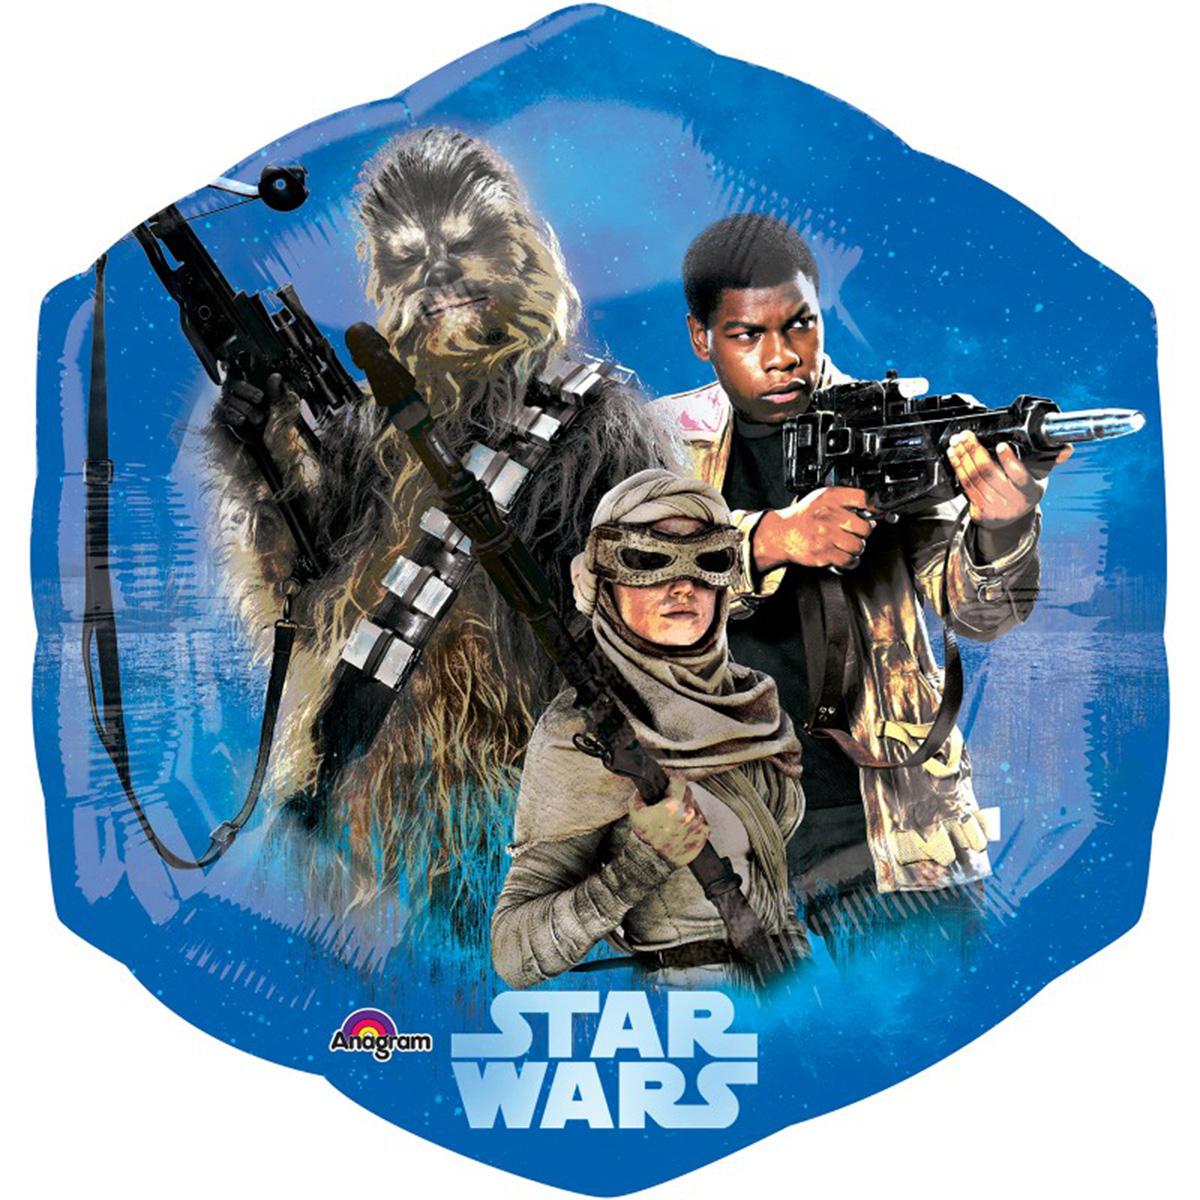 Star Wars The Force Awakens SuperShape Balloon 22x23in Balloons & Streamers - Party Centre